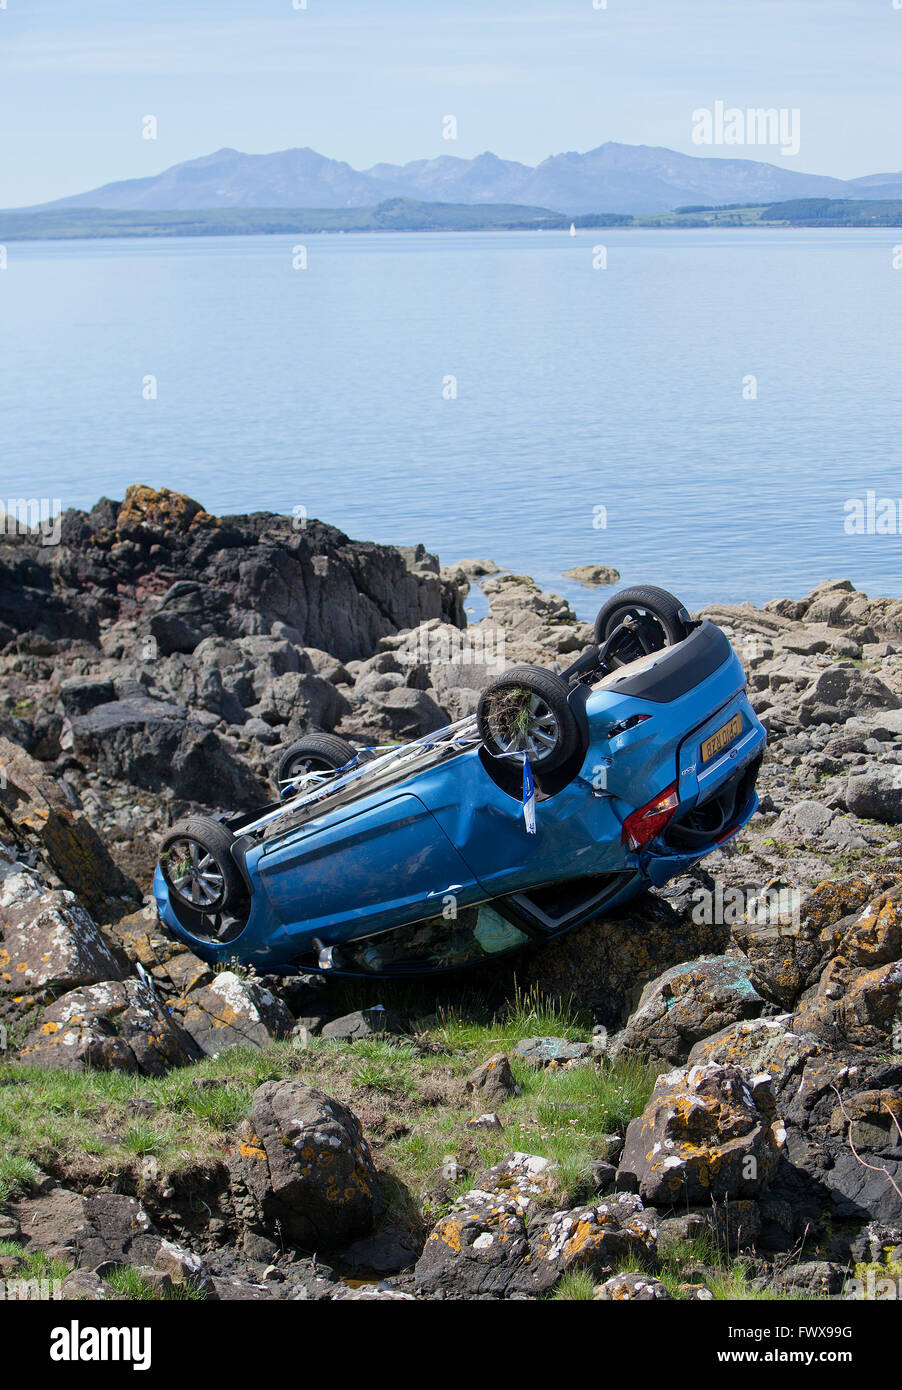 An overturned car crashed on rocks by the sea. Stock Photo